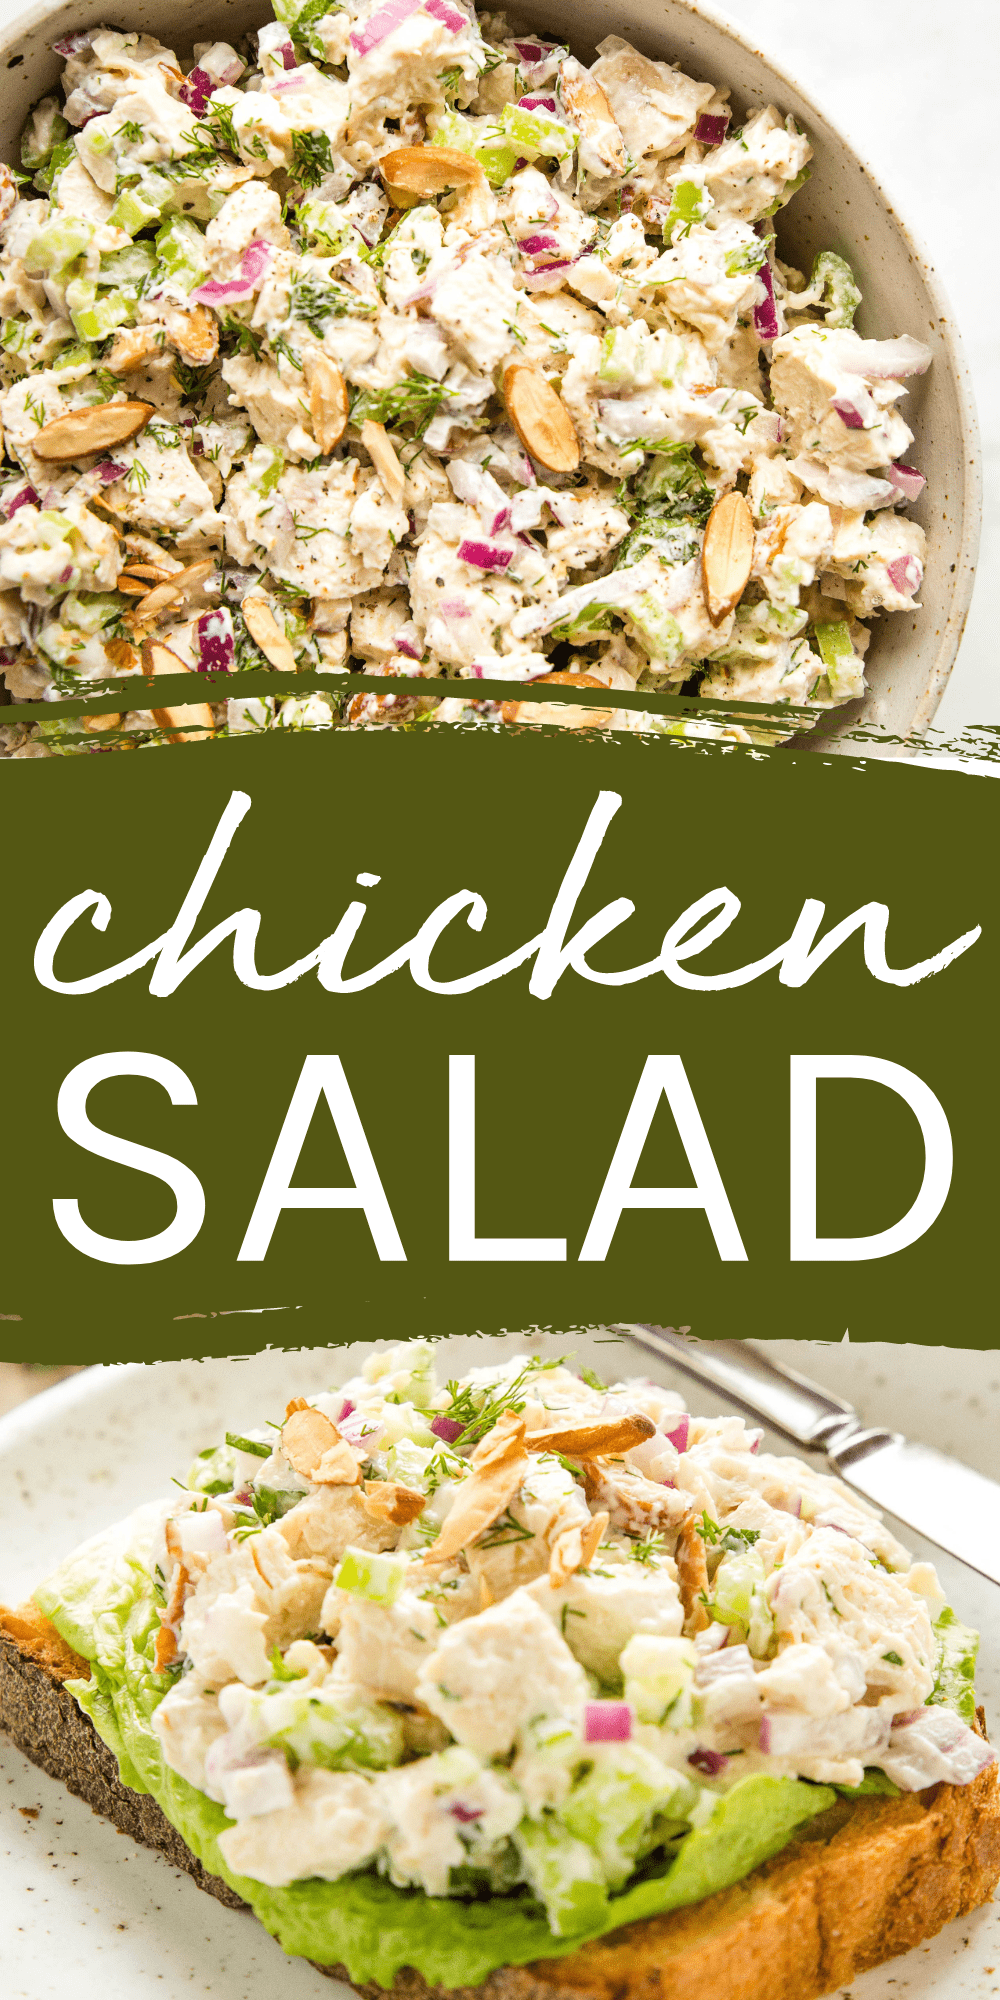 This Chicken Salad recipe is the best easy healthy chicken salad made with fresh poached chicken and a creamy low-fat Greek yogurt dressing! Recipe from thebusybaker.ca! #chickensalad #healthychickensalad #easychickensalad #bestchickensalad #healthyrecipe #picnicrecipe #lowfatchickenrecipe via @busybakerblog